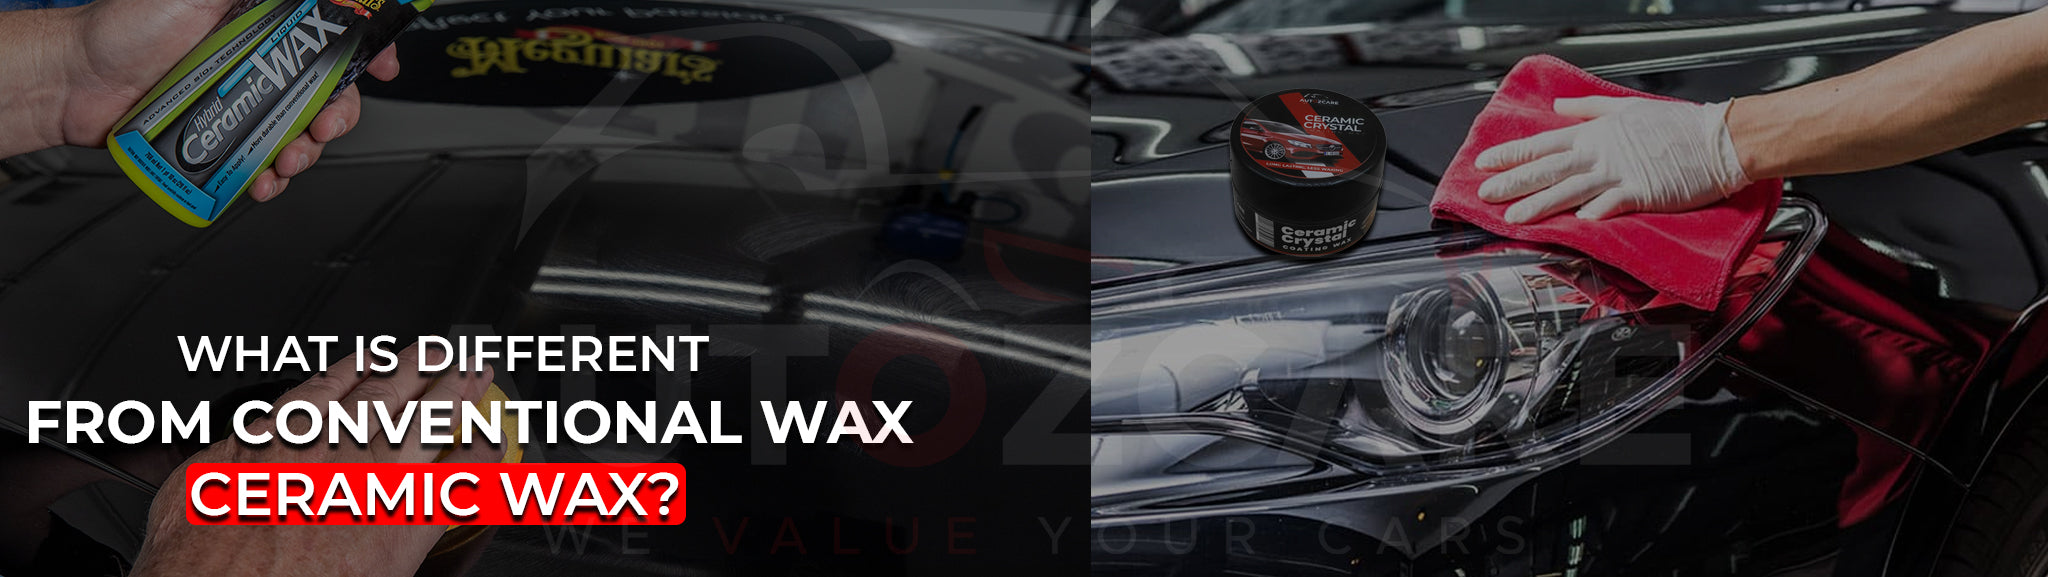 What is different from conventional wax ceramic wax?